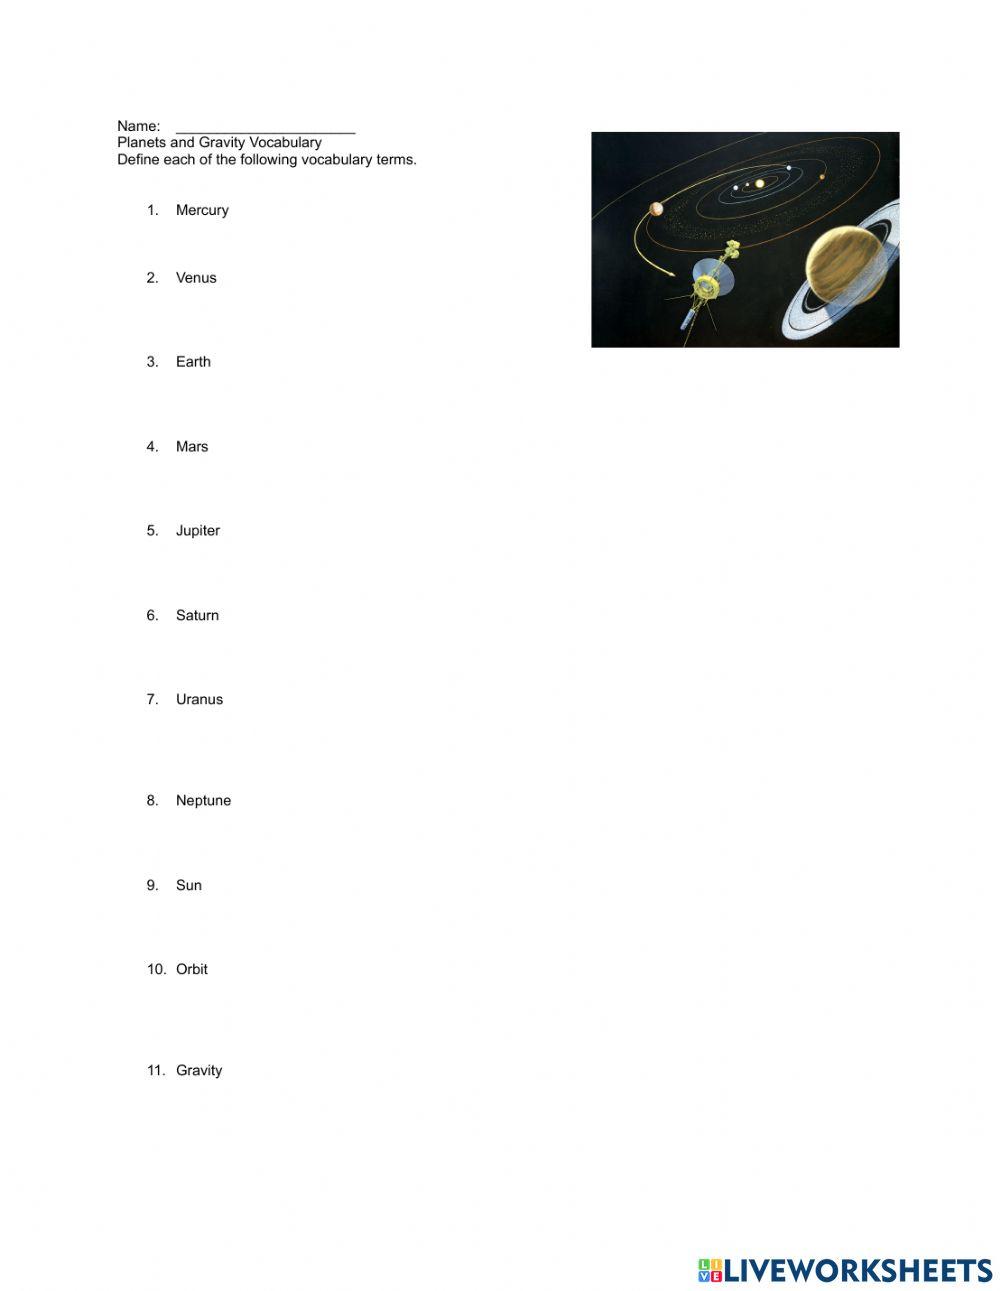 Planets and Gravity Vocabulary